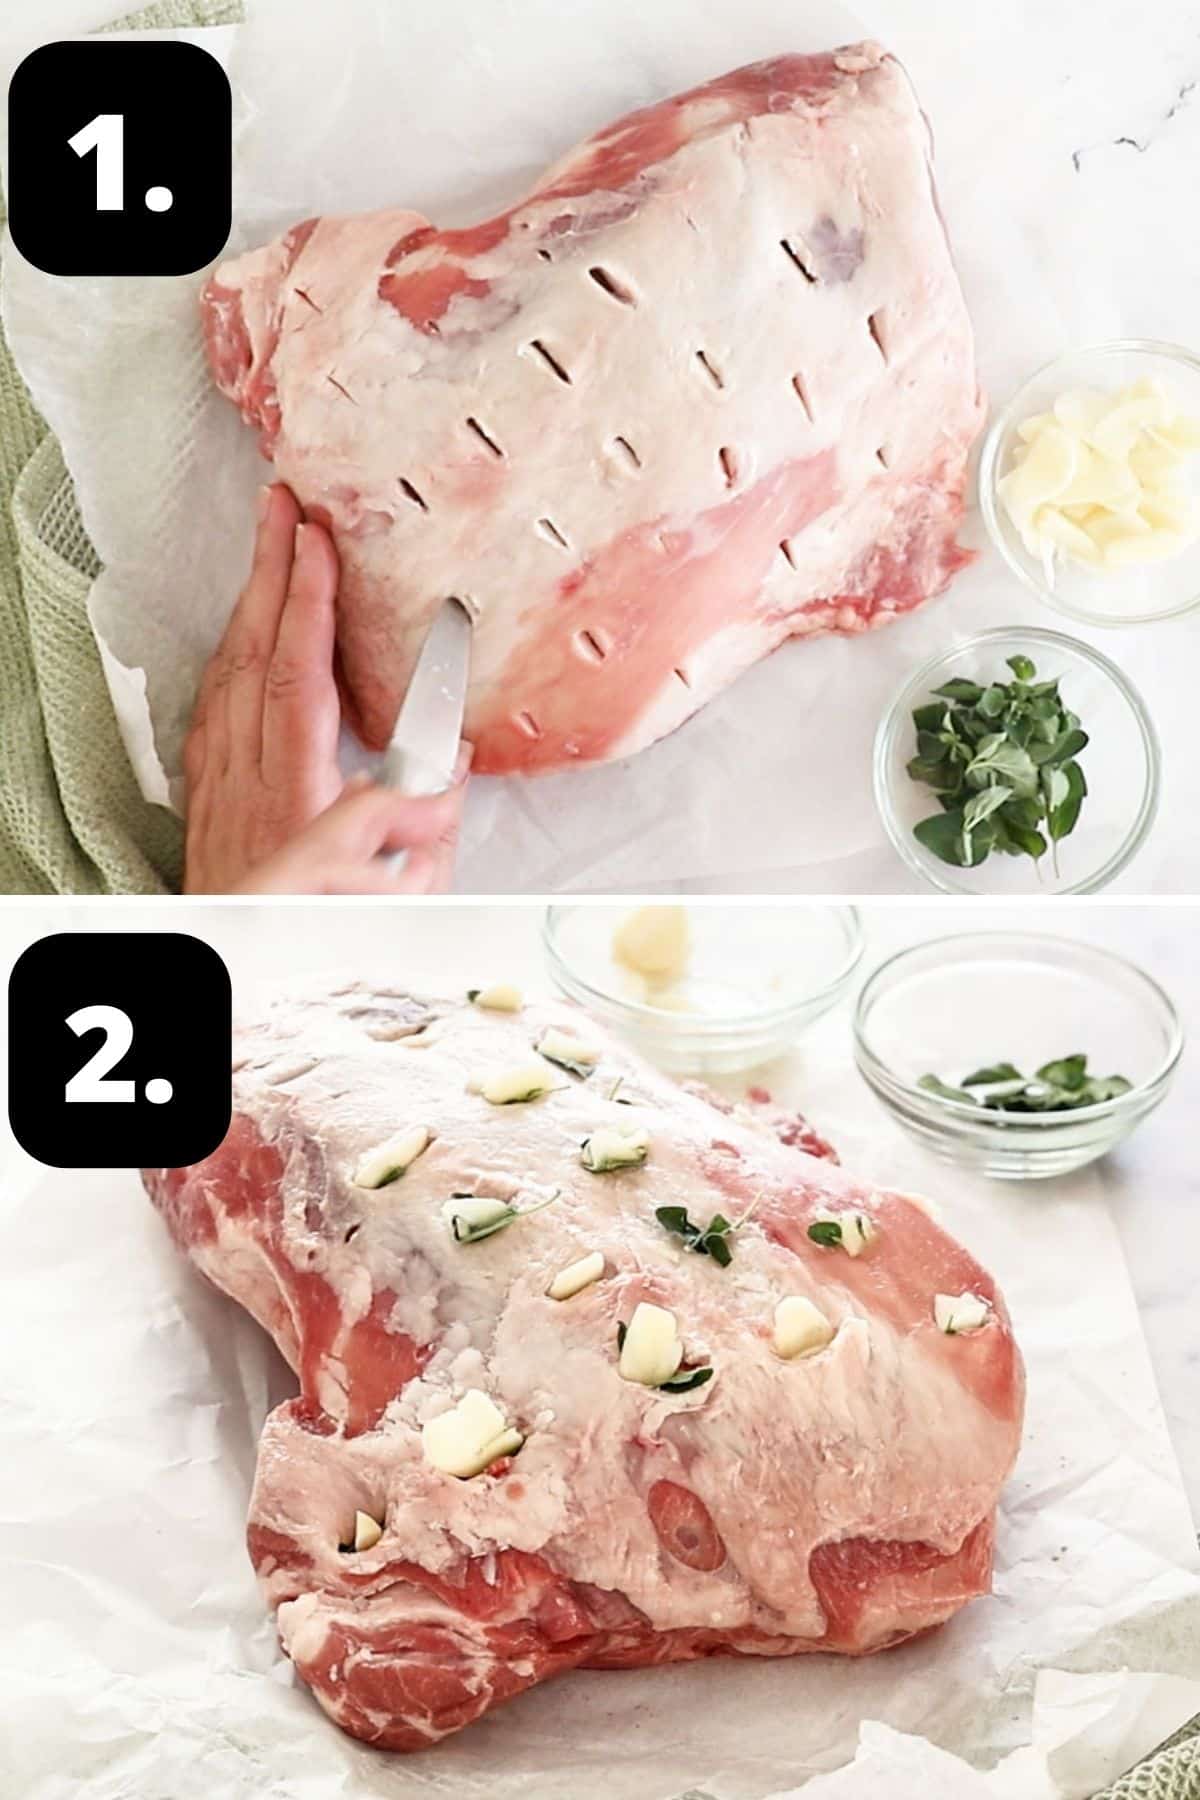 Steps 1-2 of preparing this recipe - cutting incisions into the lamb and filling them with the garlic and fresh oregano.